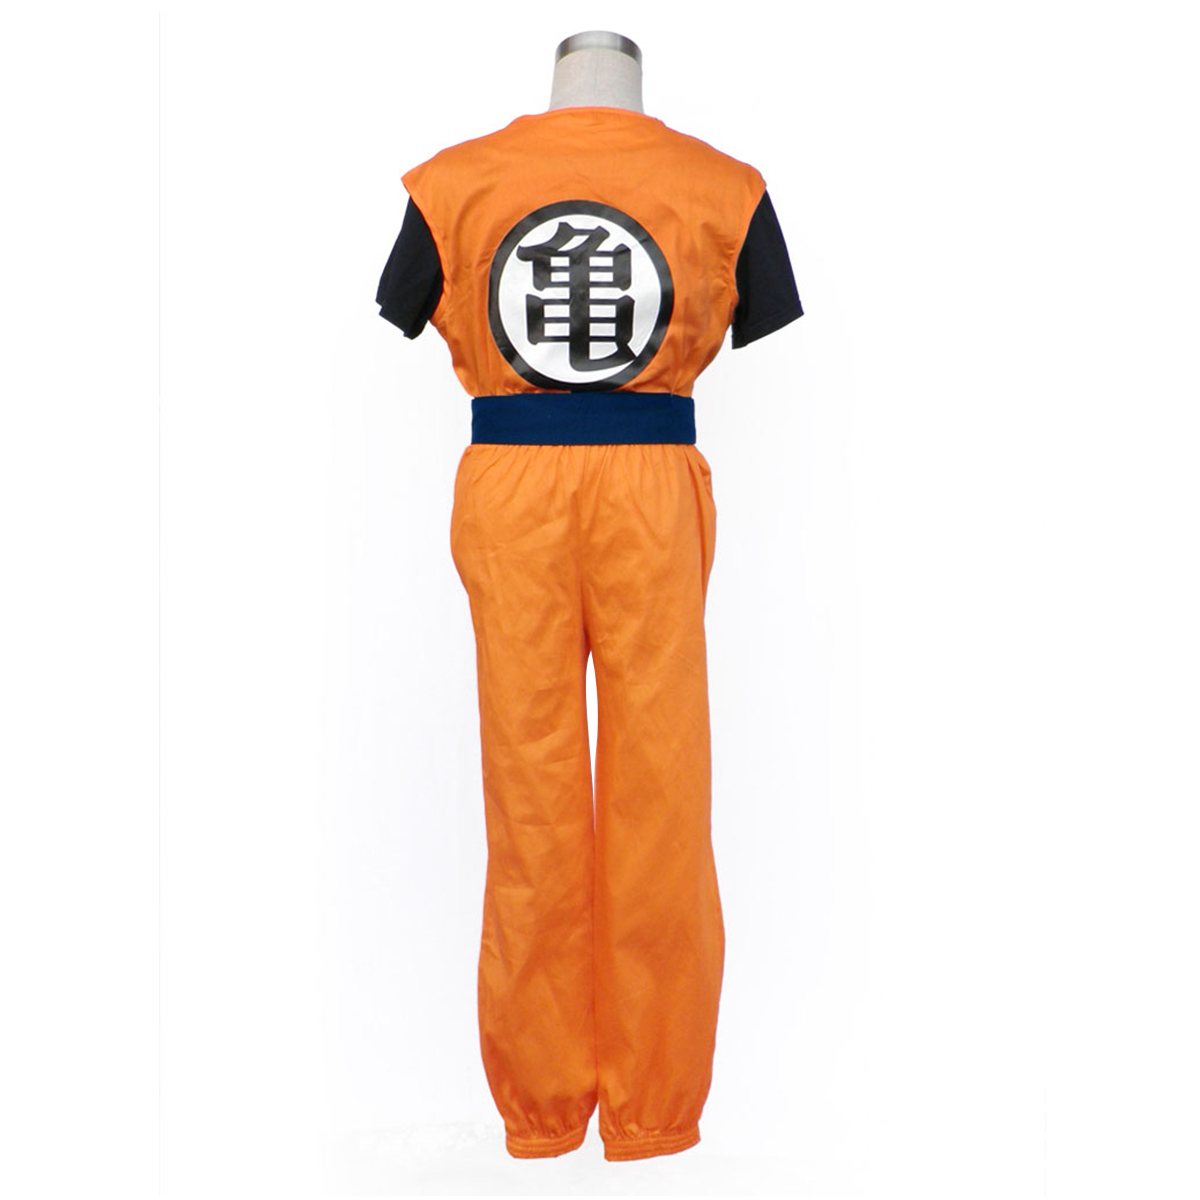 Dragon Ball Krillin Cosplay Costumes New Zealand Online Store